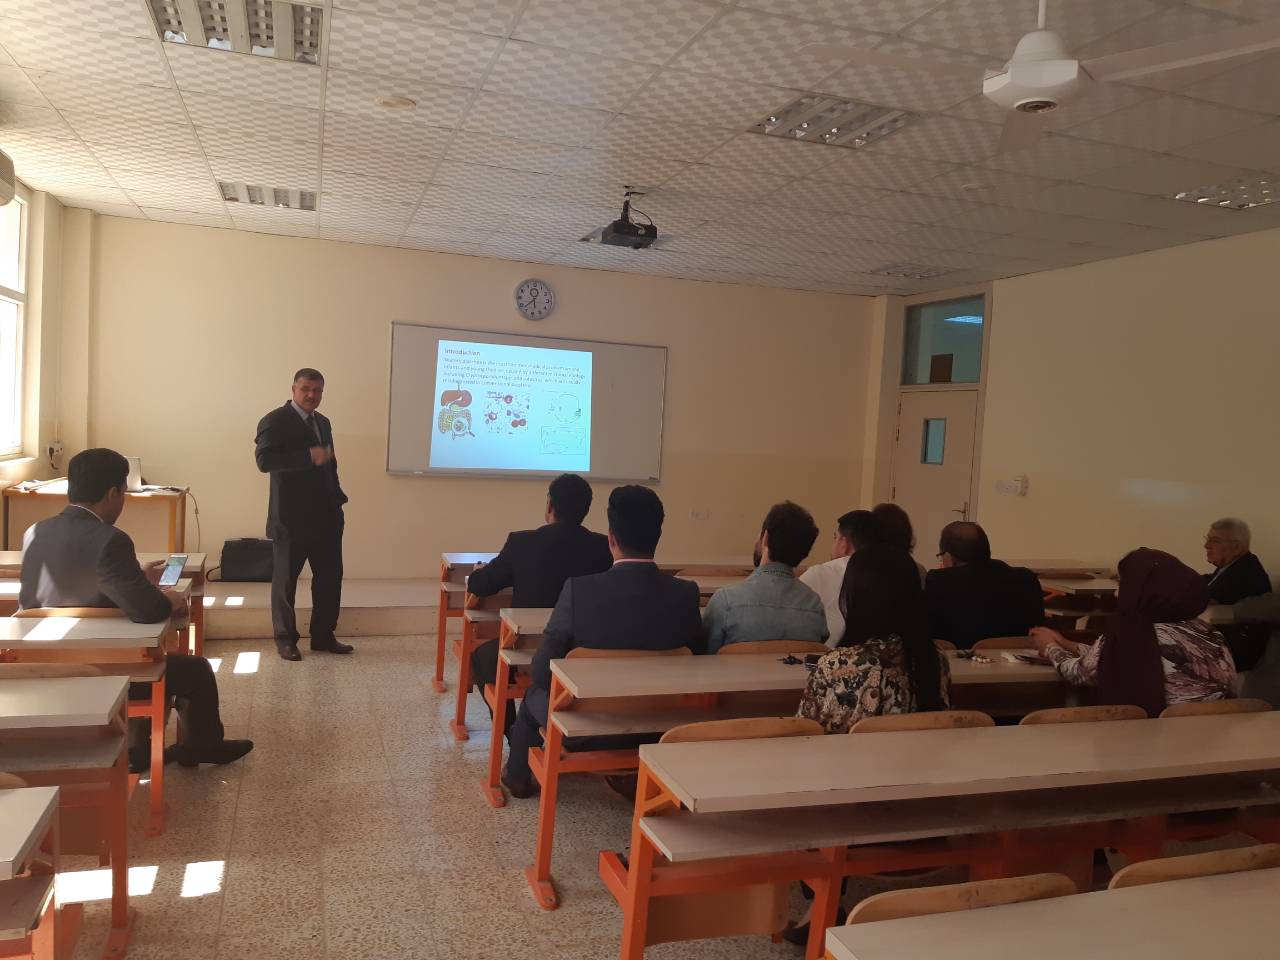 Seminar on “Immune Aspects of Heat Shock Proteins in Cystic Echinococcosis”